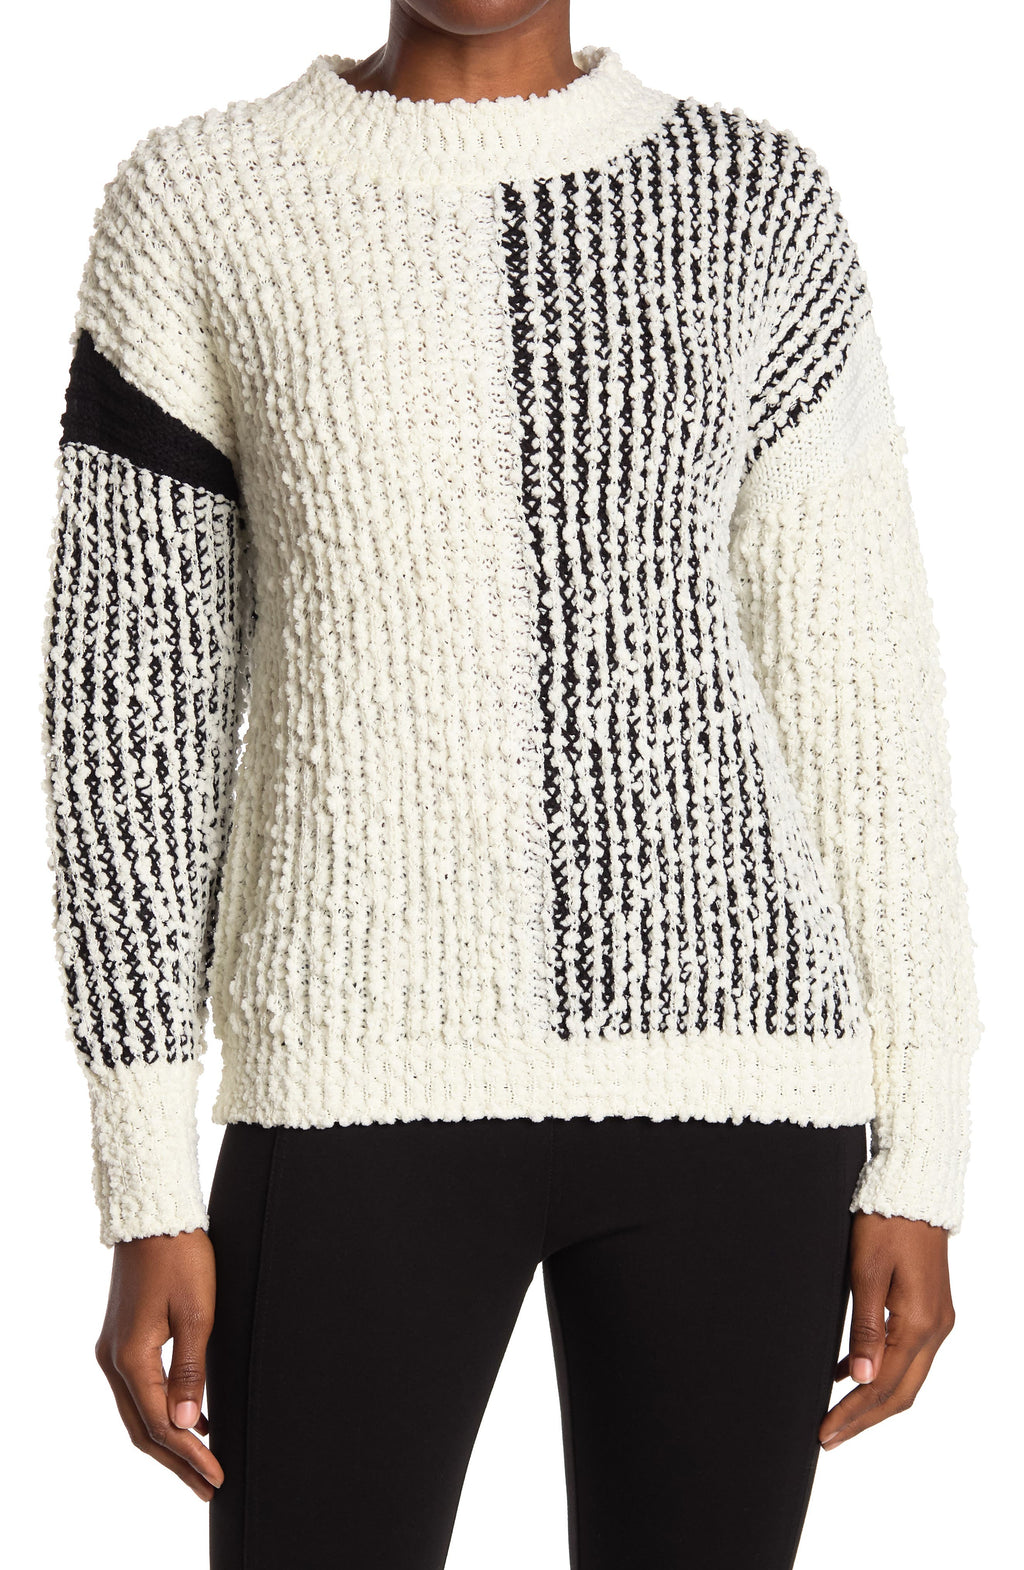 BOBEAU Colorblock Boucle Knit Pullover Sweater, Main, color, IVORY/ BLACK